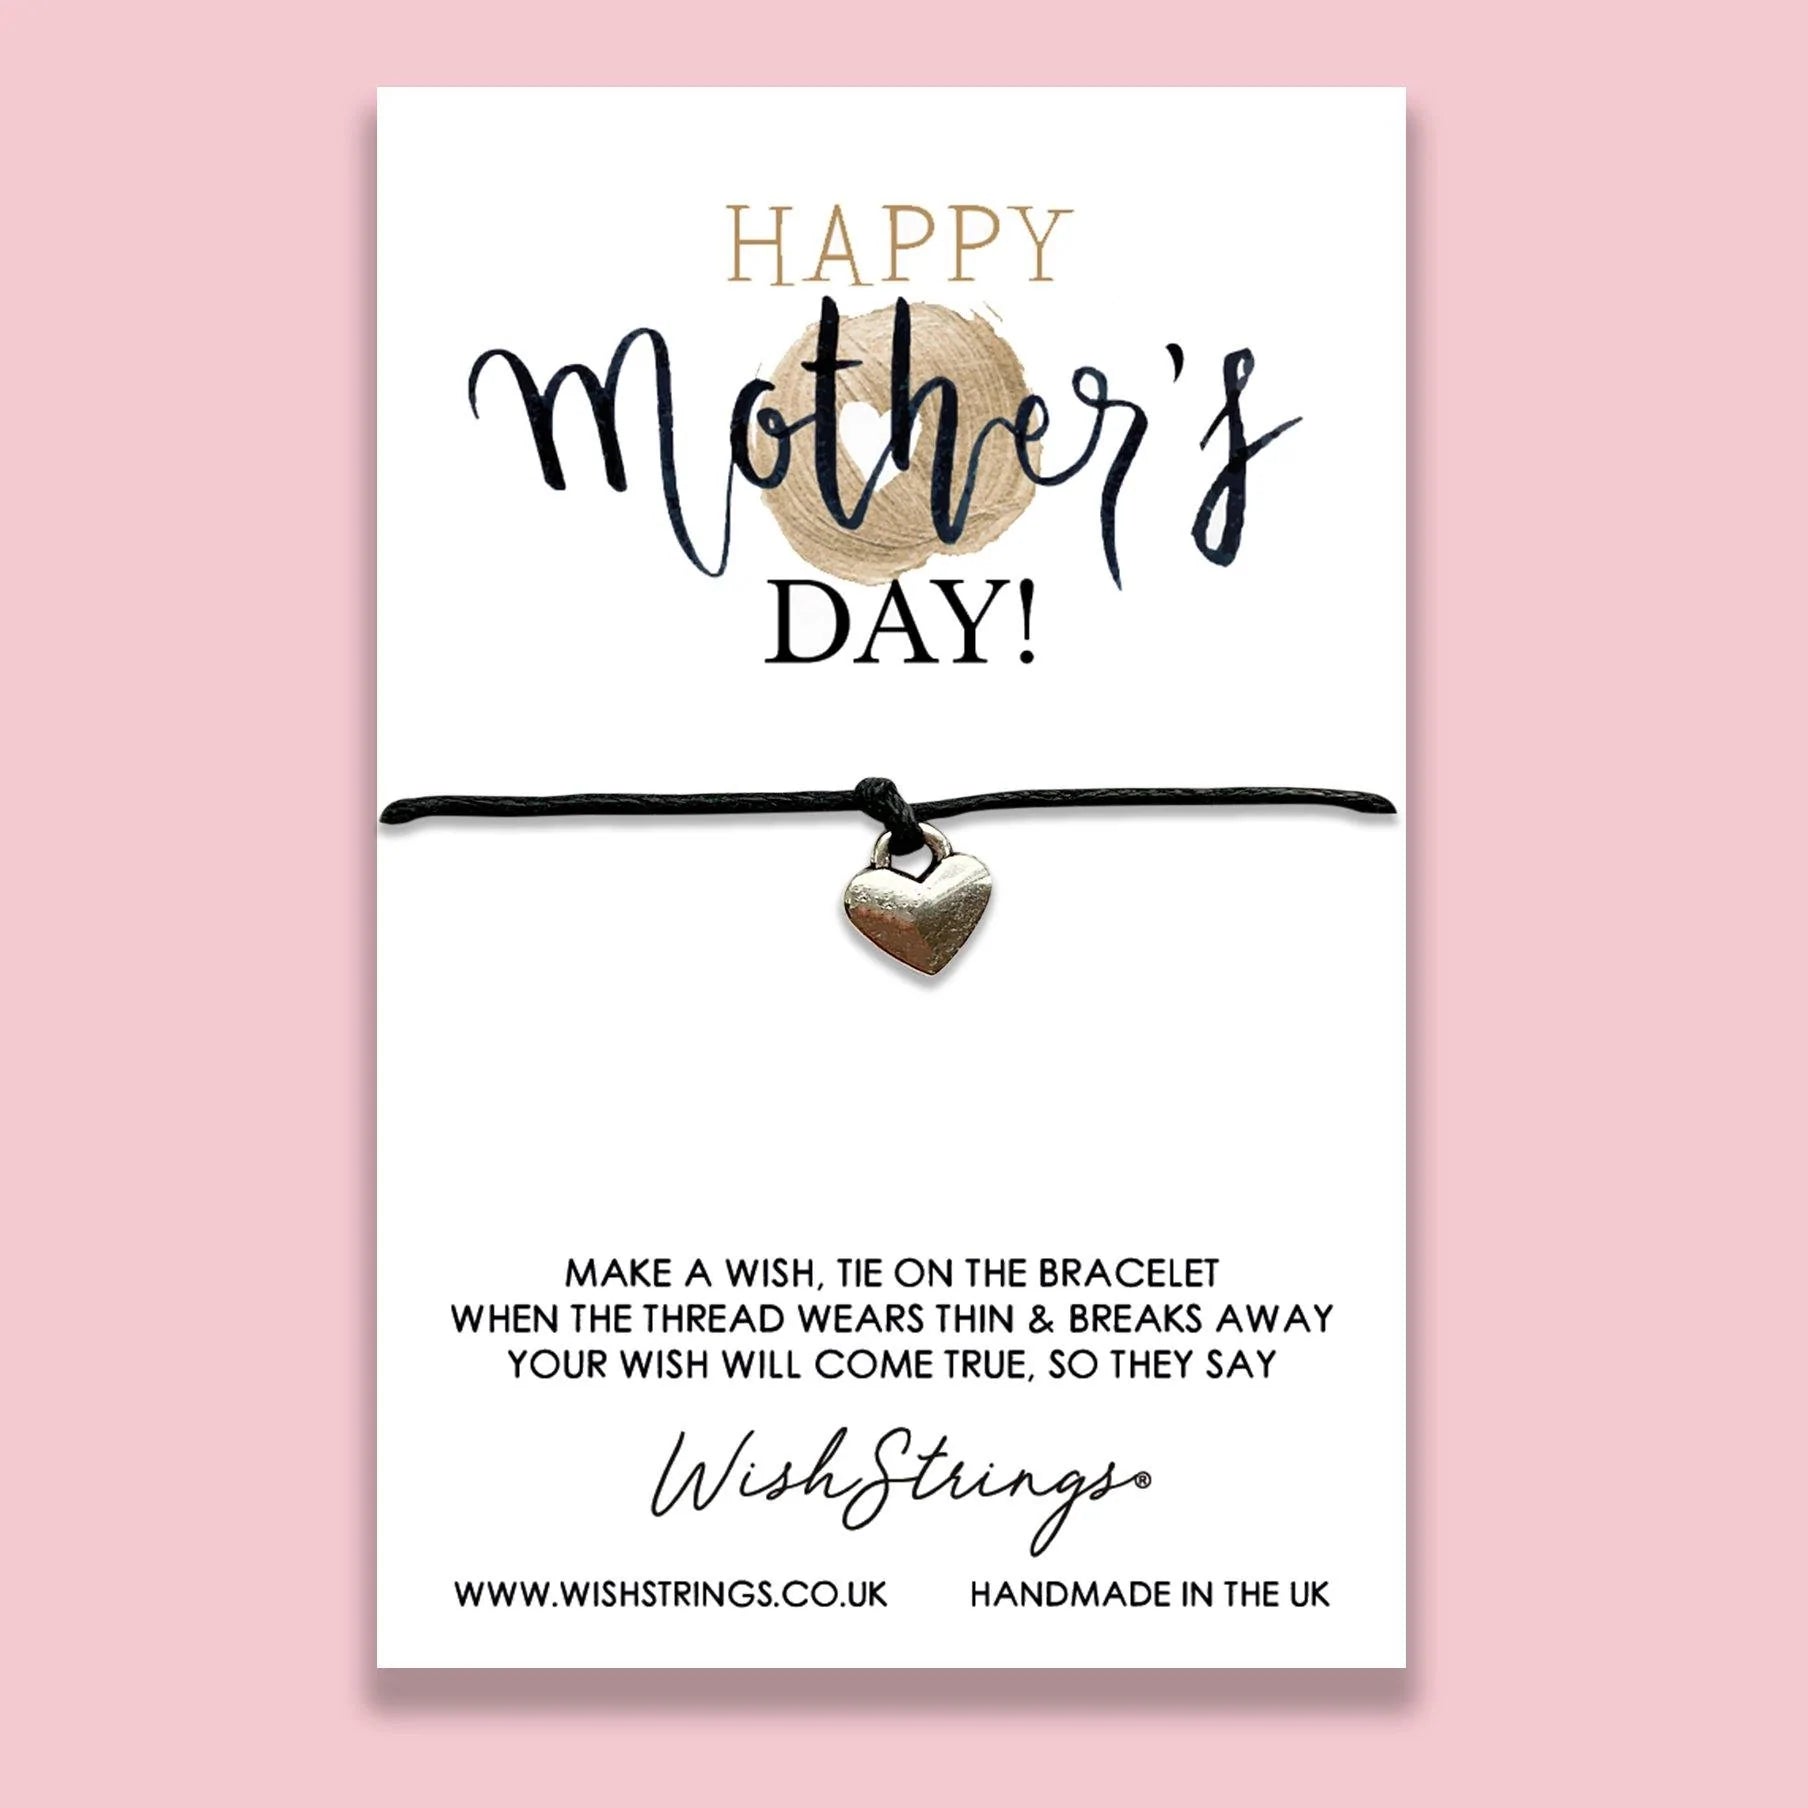 A heart charm on a cord which can be cut to size presented on a card with Happy Mothers Day